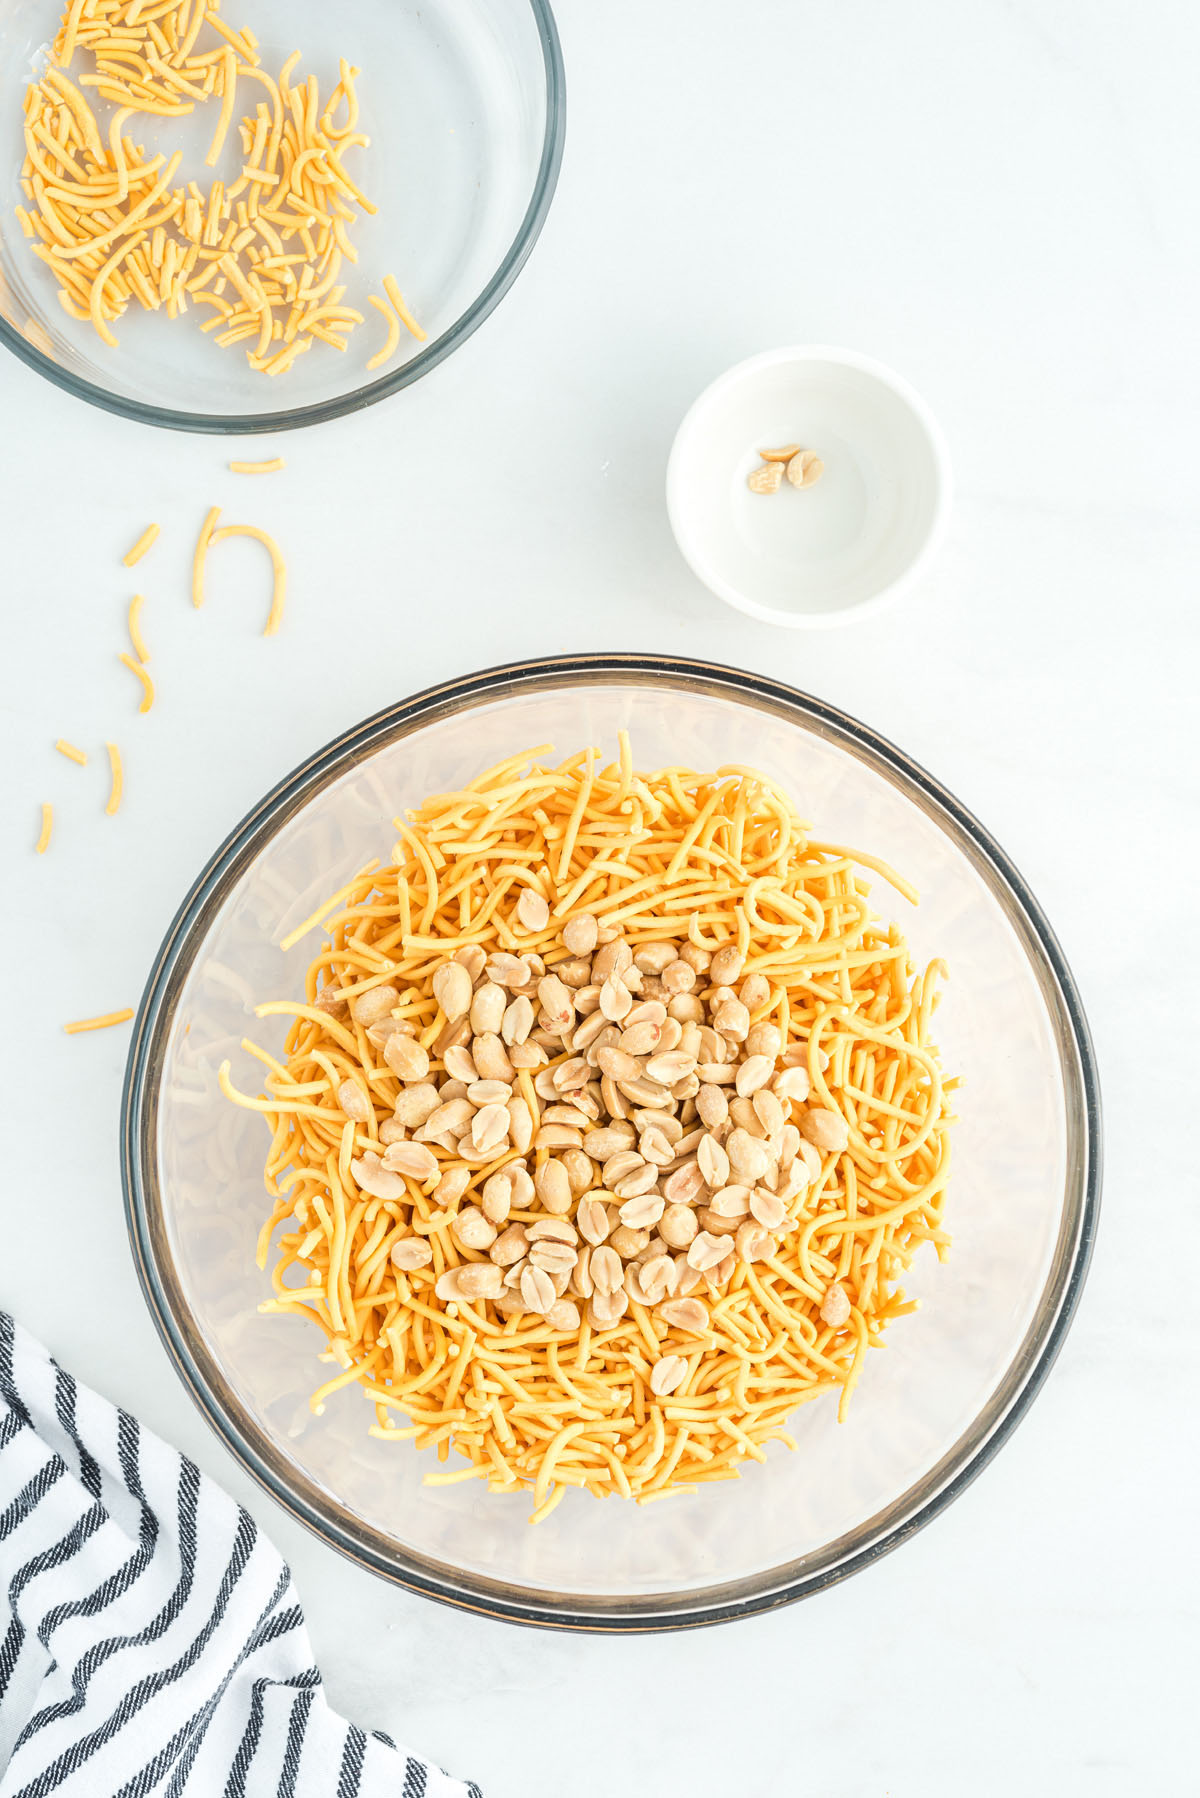 peanuts and chow mein noodles in a large bowl